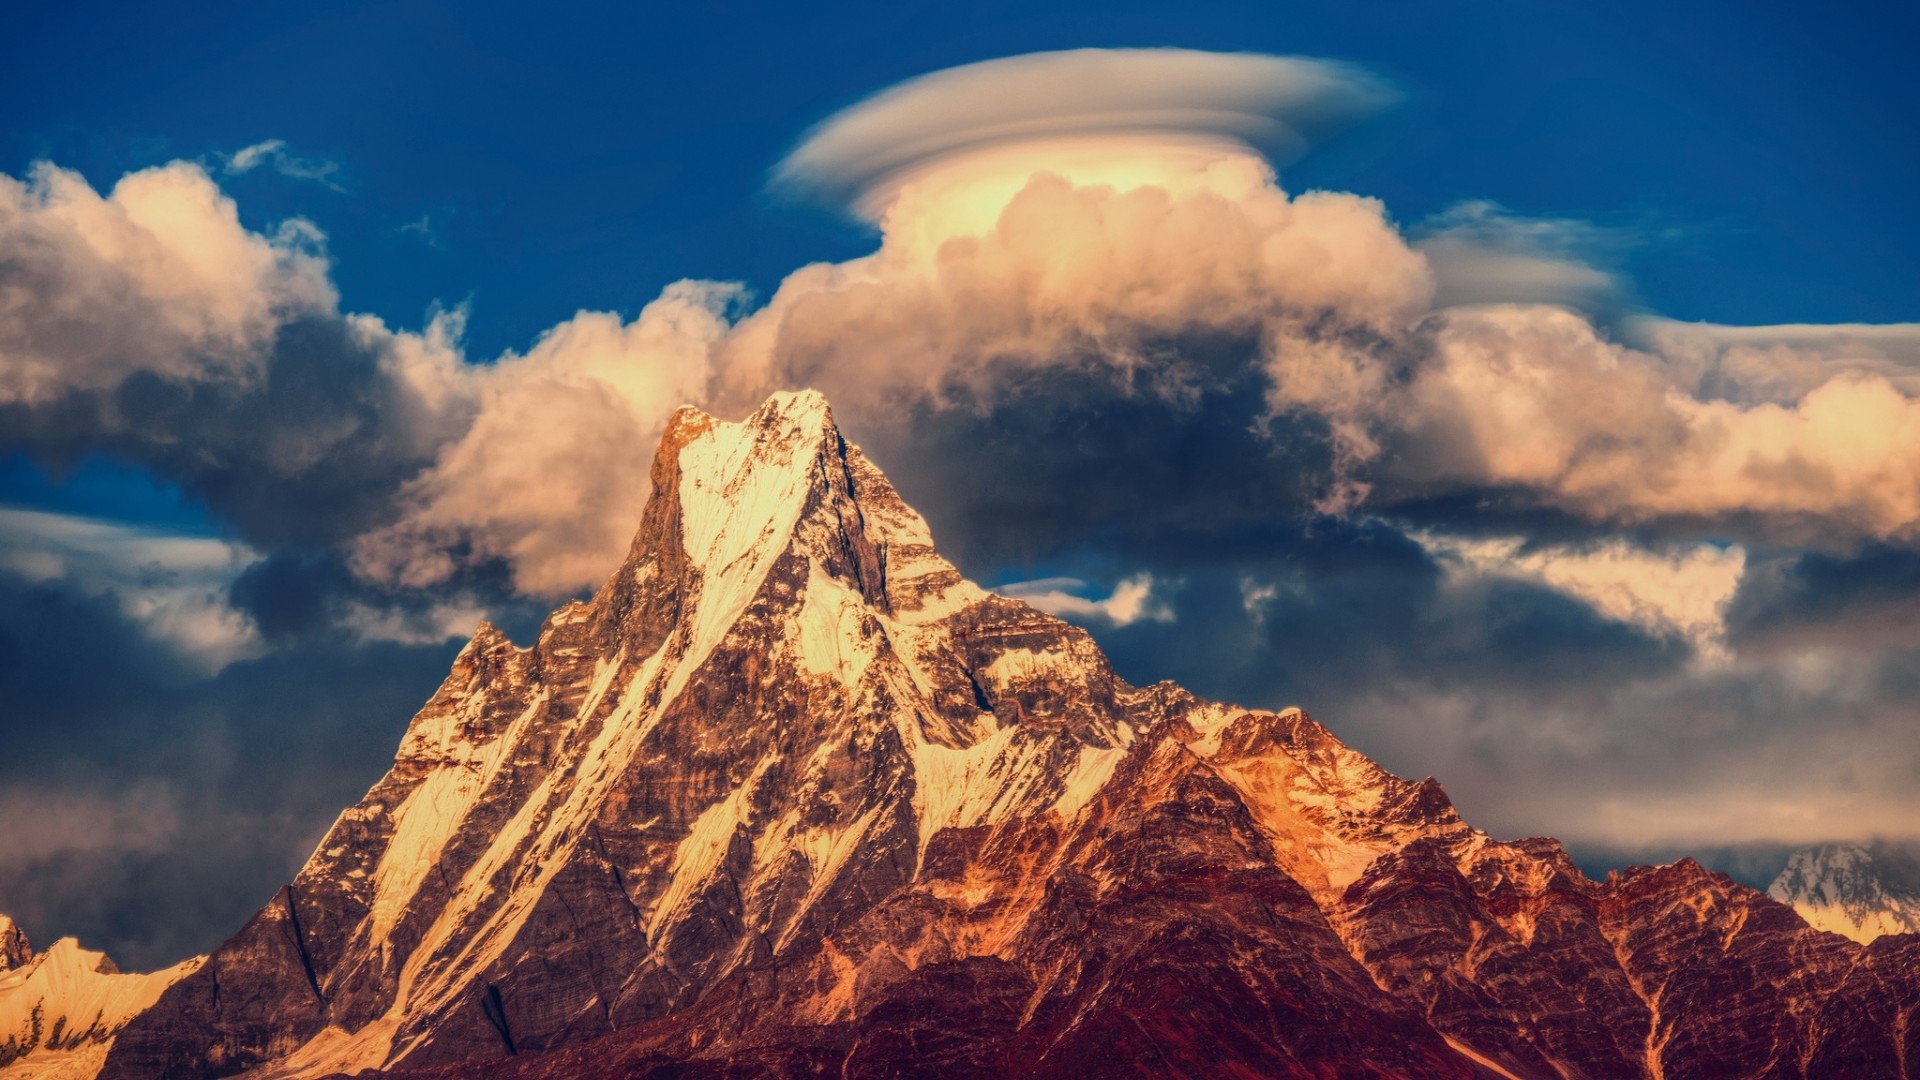 Himalayas Mountains Nepal for 1920 x 1080 HDTV 1080p resolution